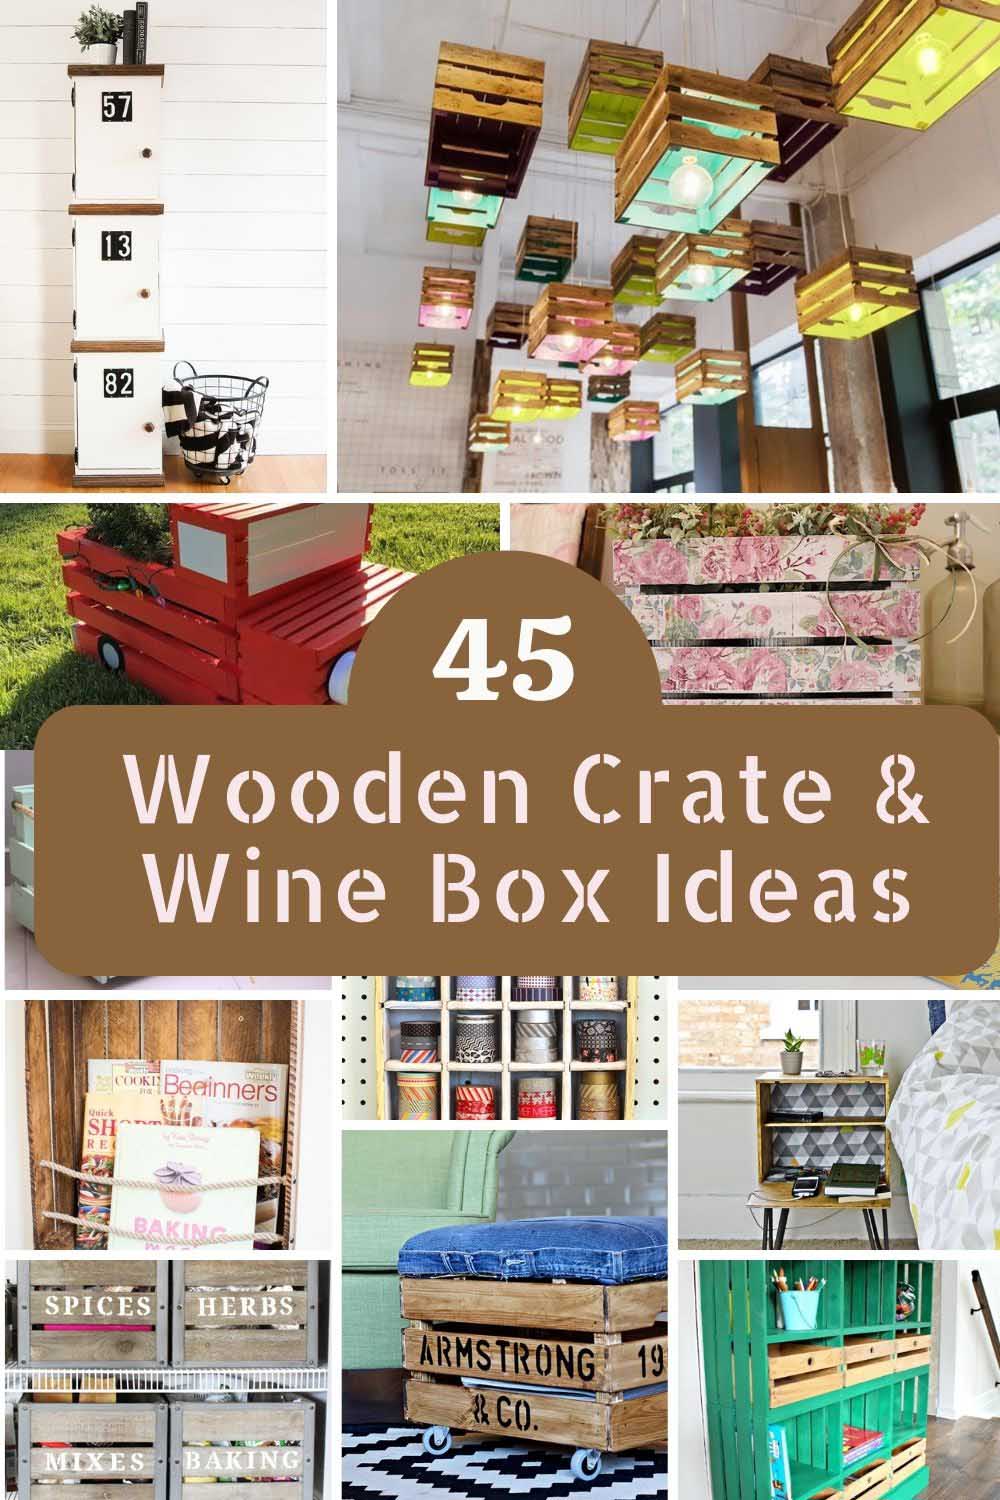 Wooden Crates With Shelf, Solid and Strong Storage Boxes, Home